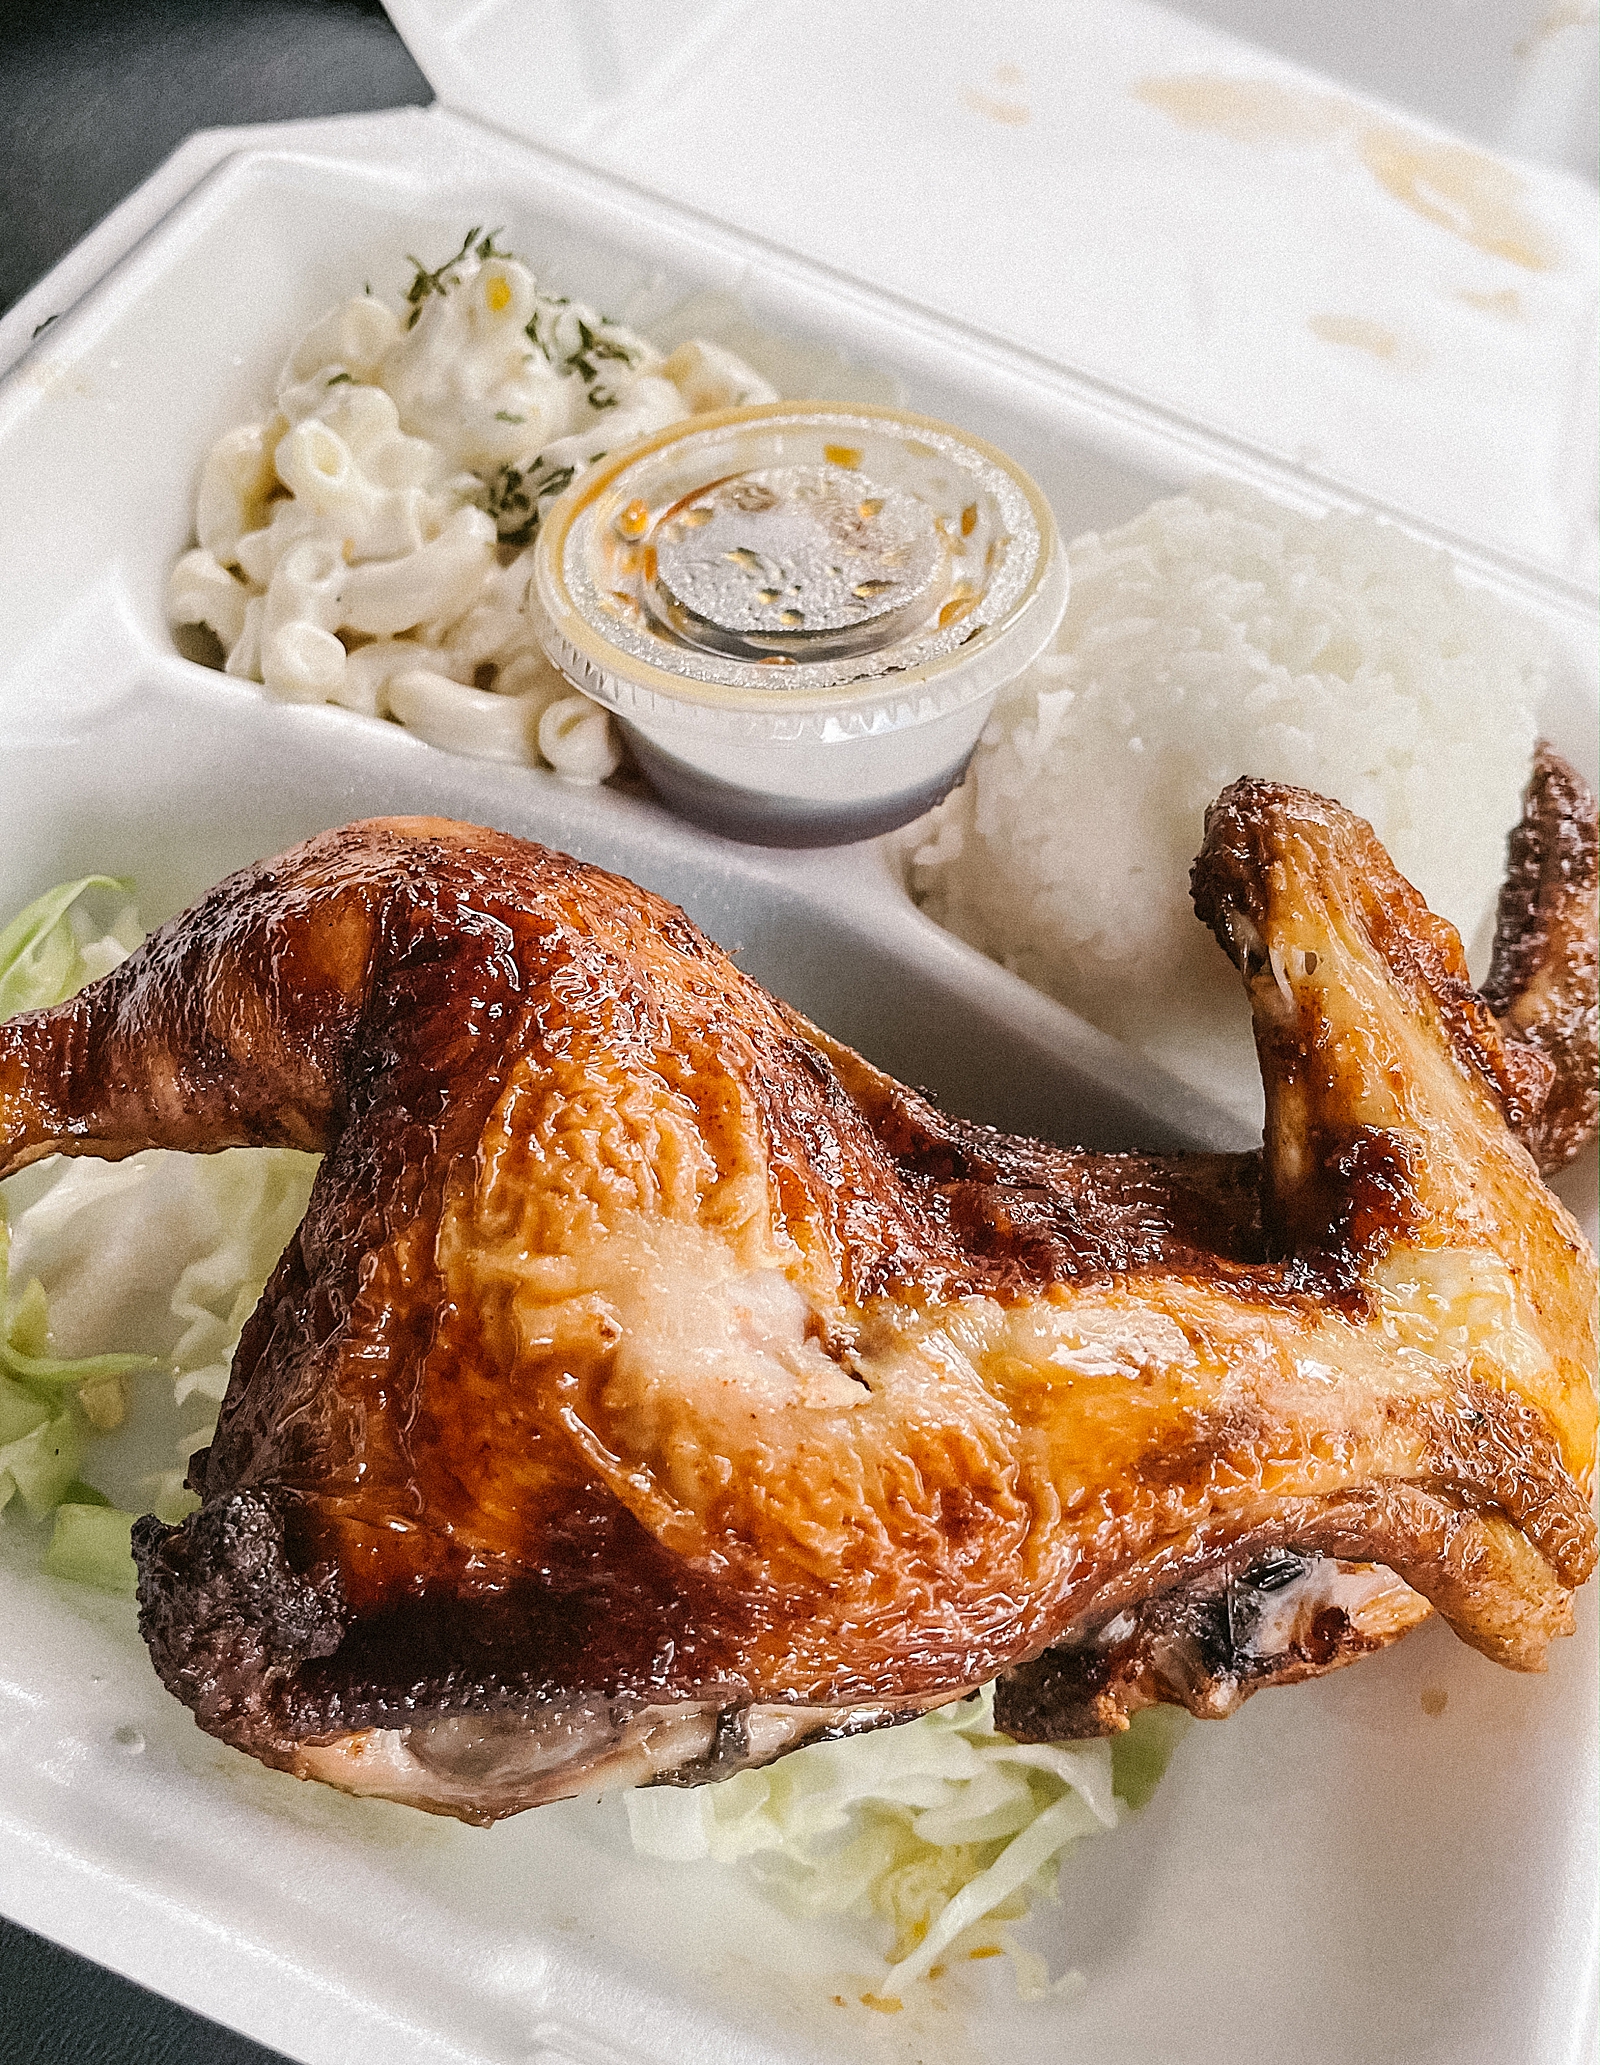 Huli huli chicken | Best Places To Eat In Oahu